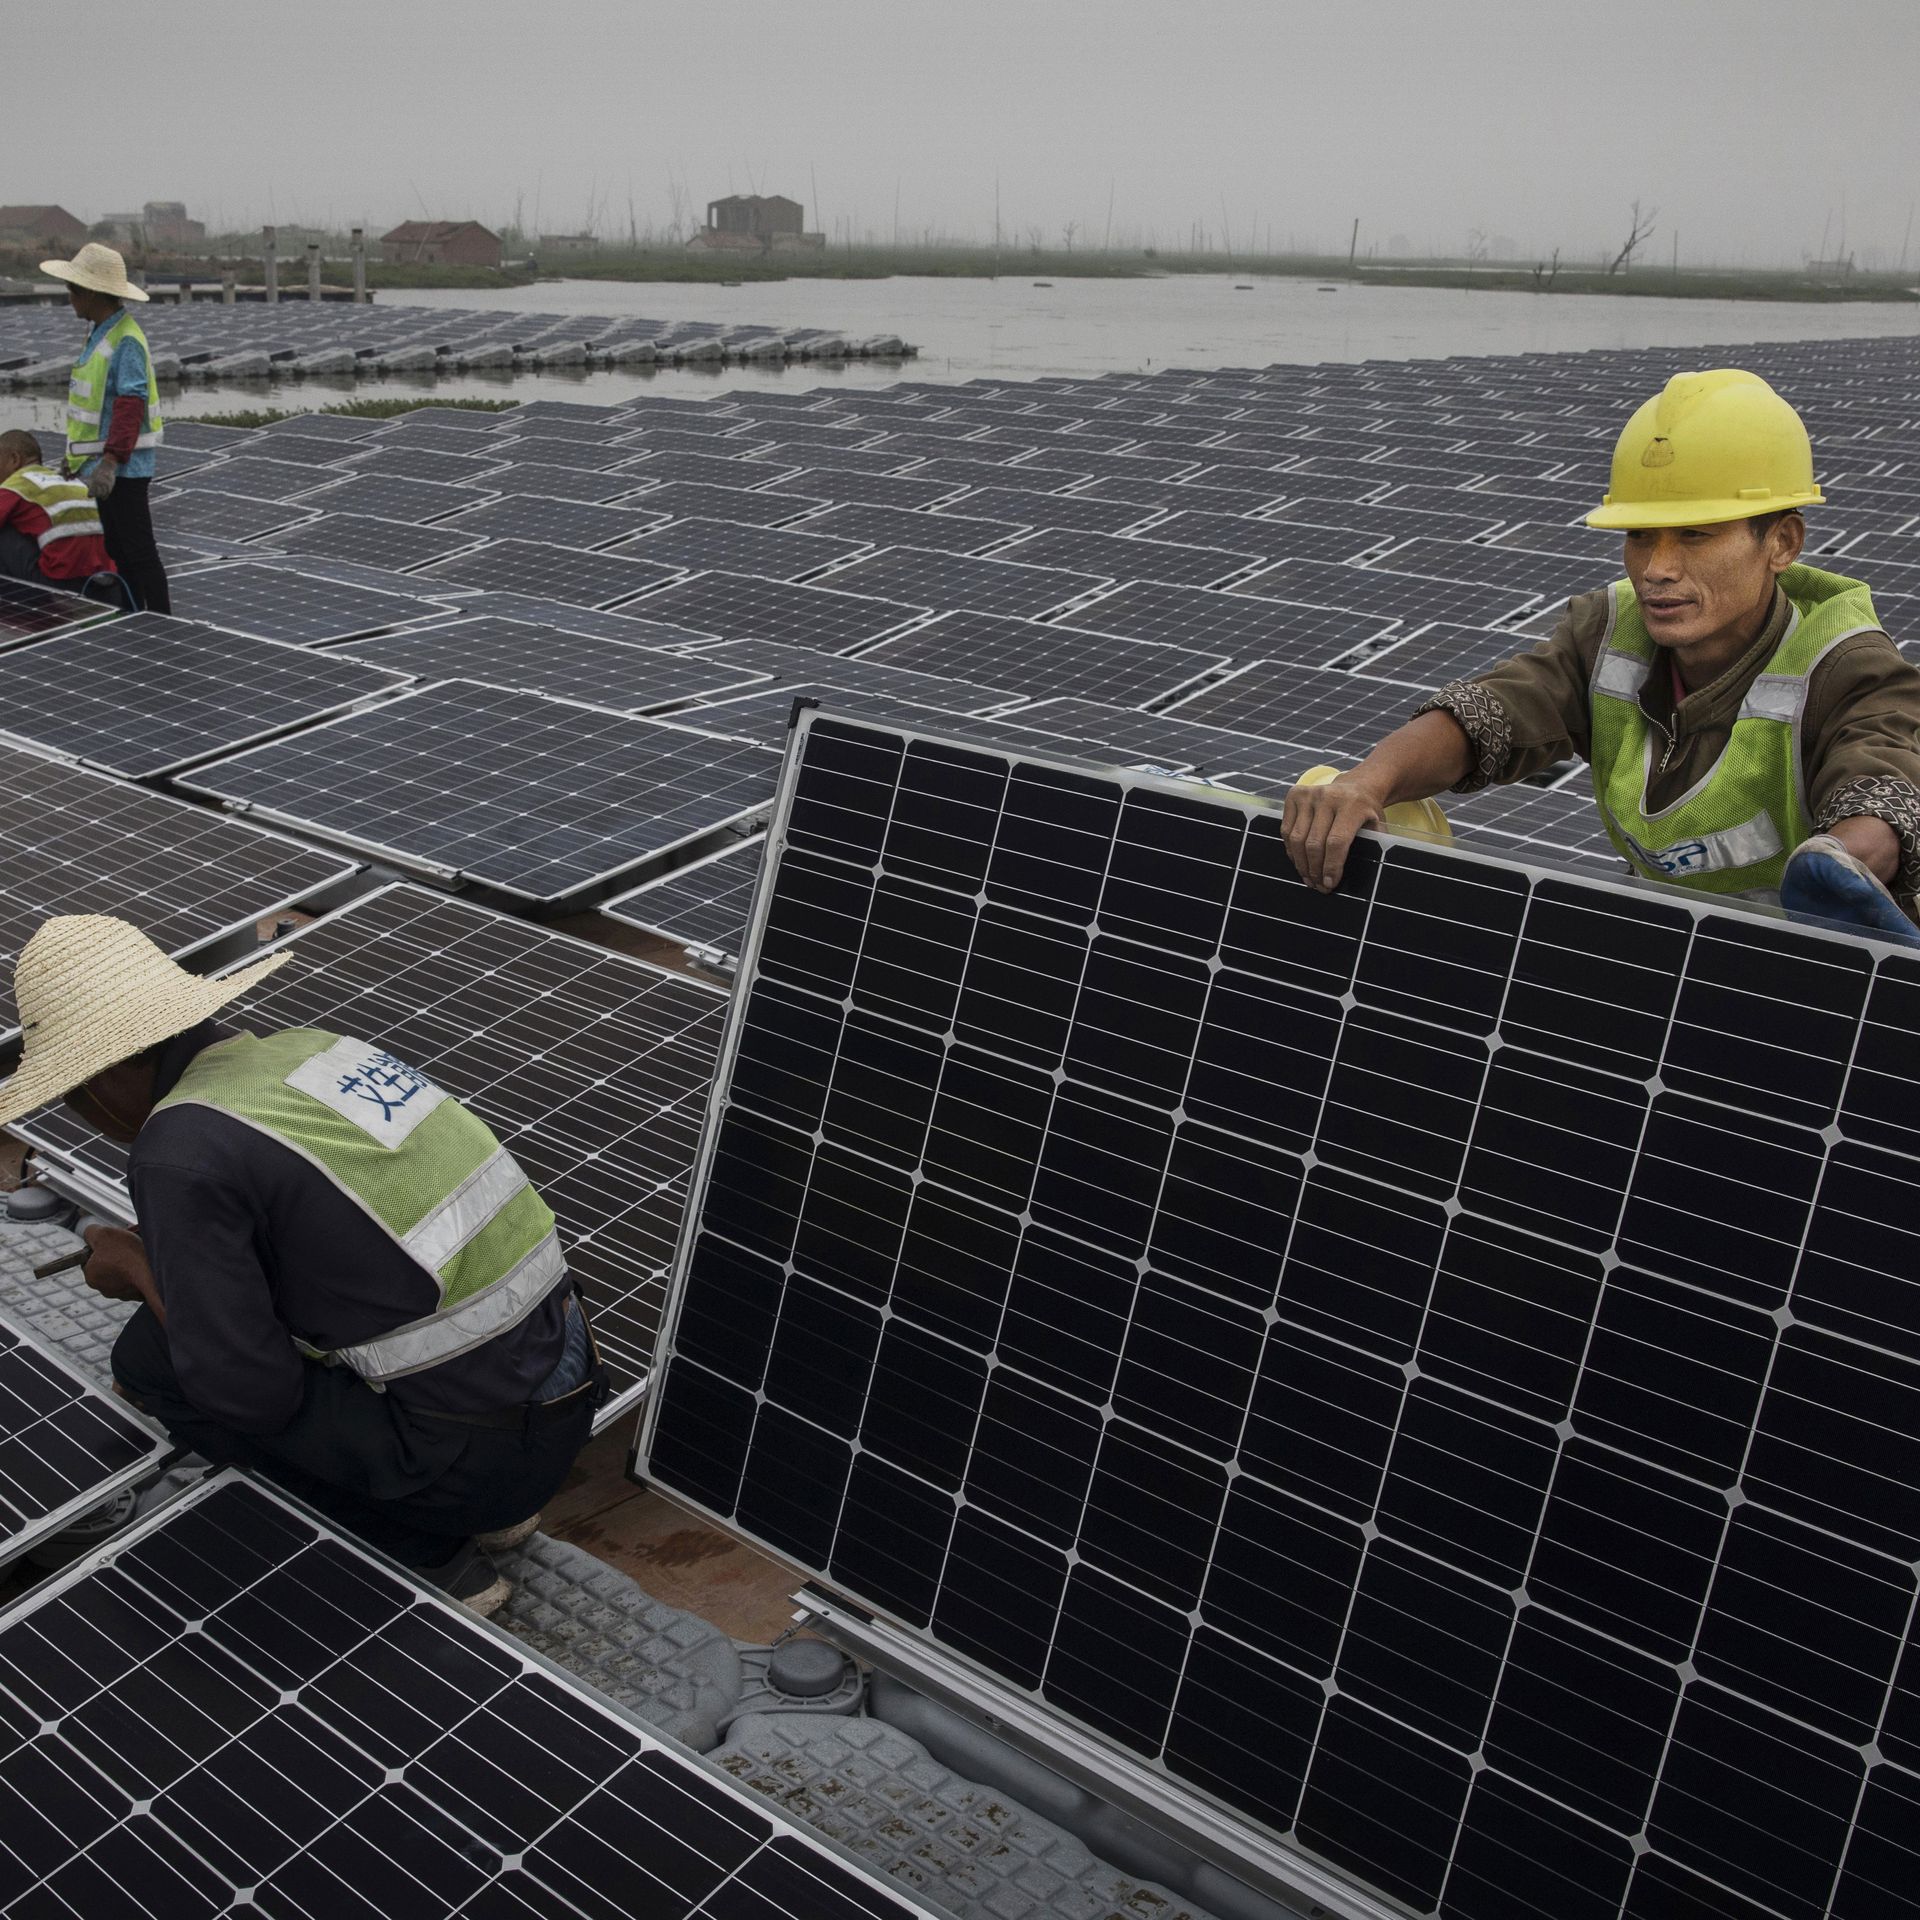 Chinese workers prepare panels that will be part of a large floating solar farm project under construction